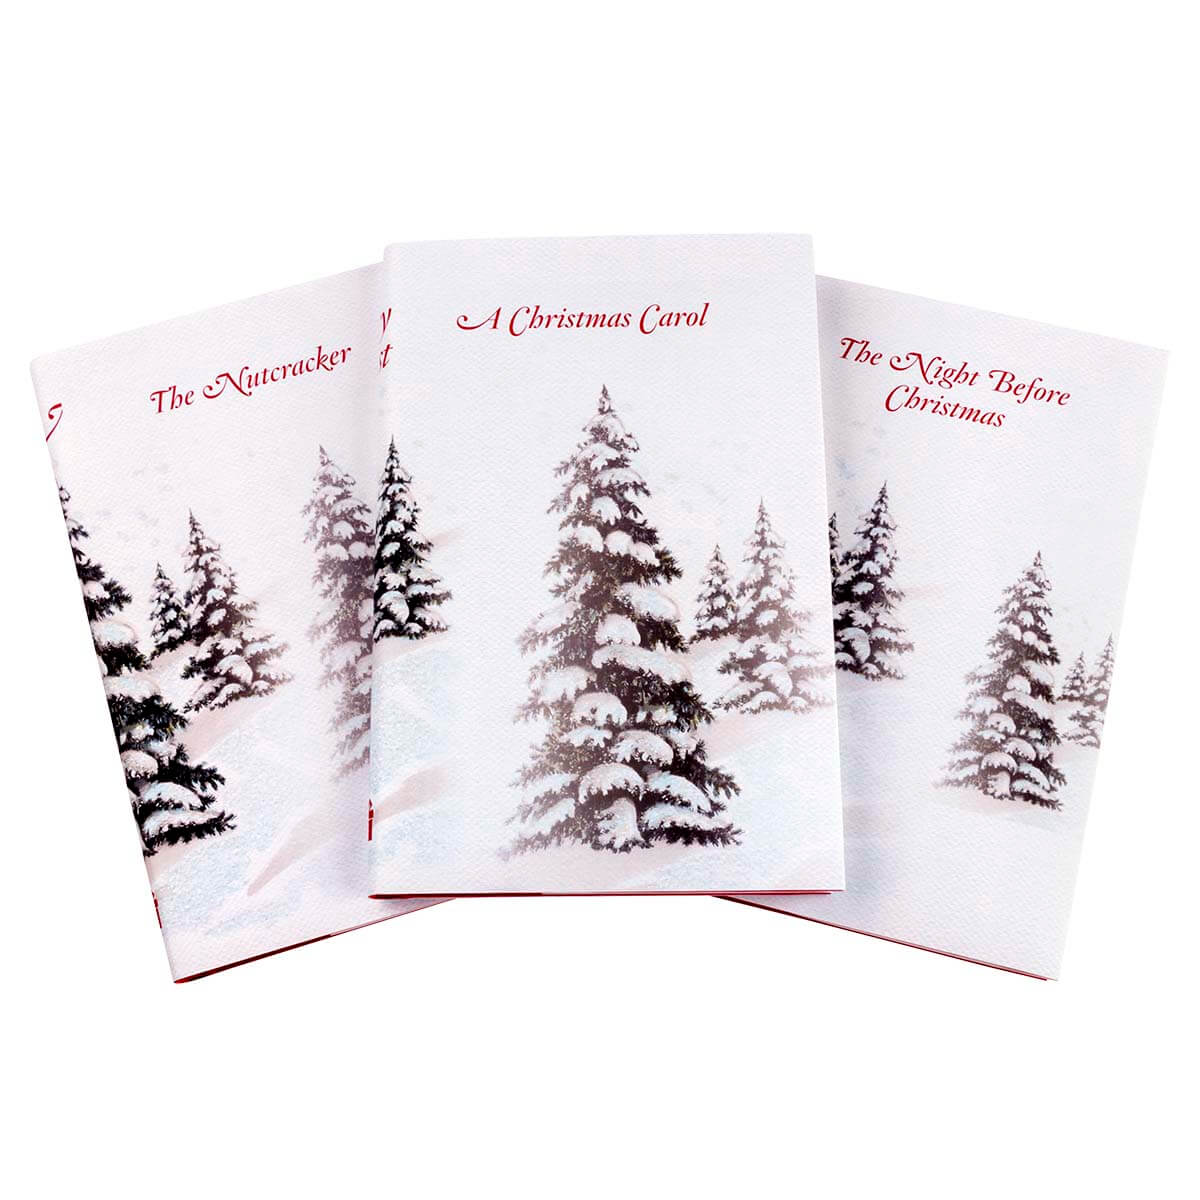 This festive set of novels is the perfect way to celebrate your favorite year-end traditions. Book Set, gift, trade, Christmas shopping. Covers feature red script font and snowy pine trees.